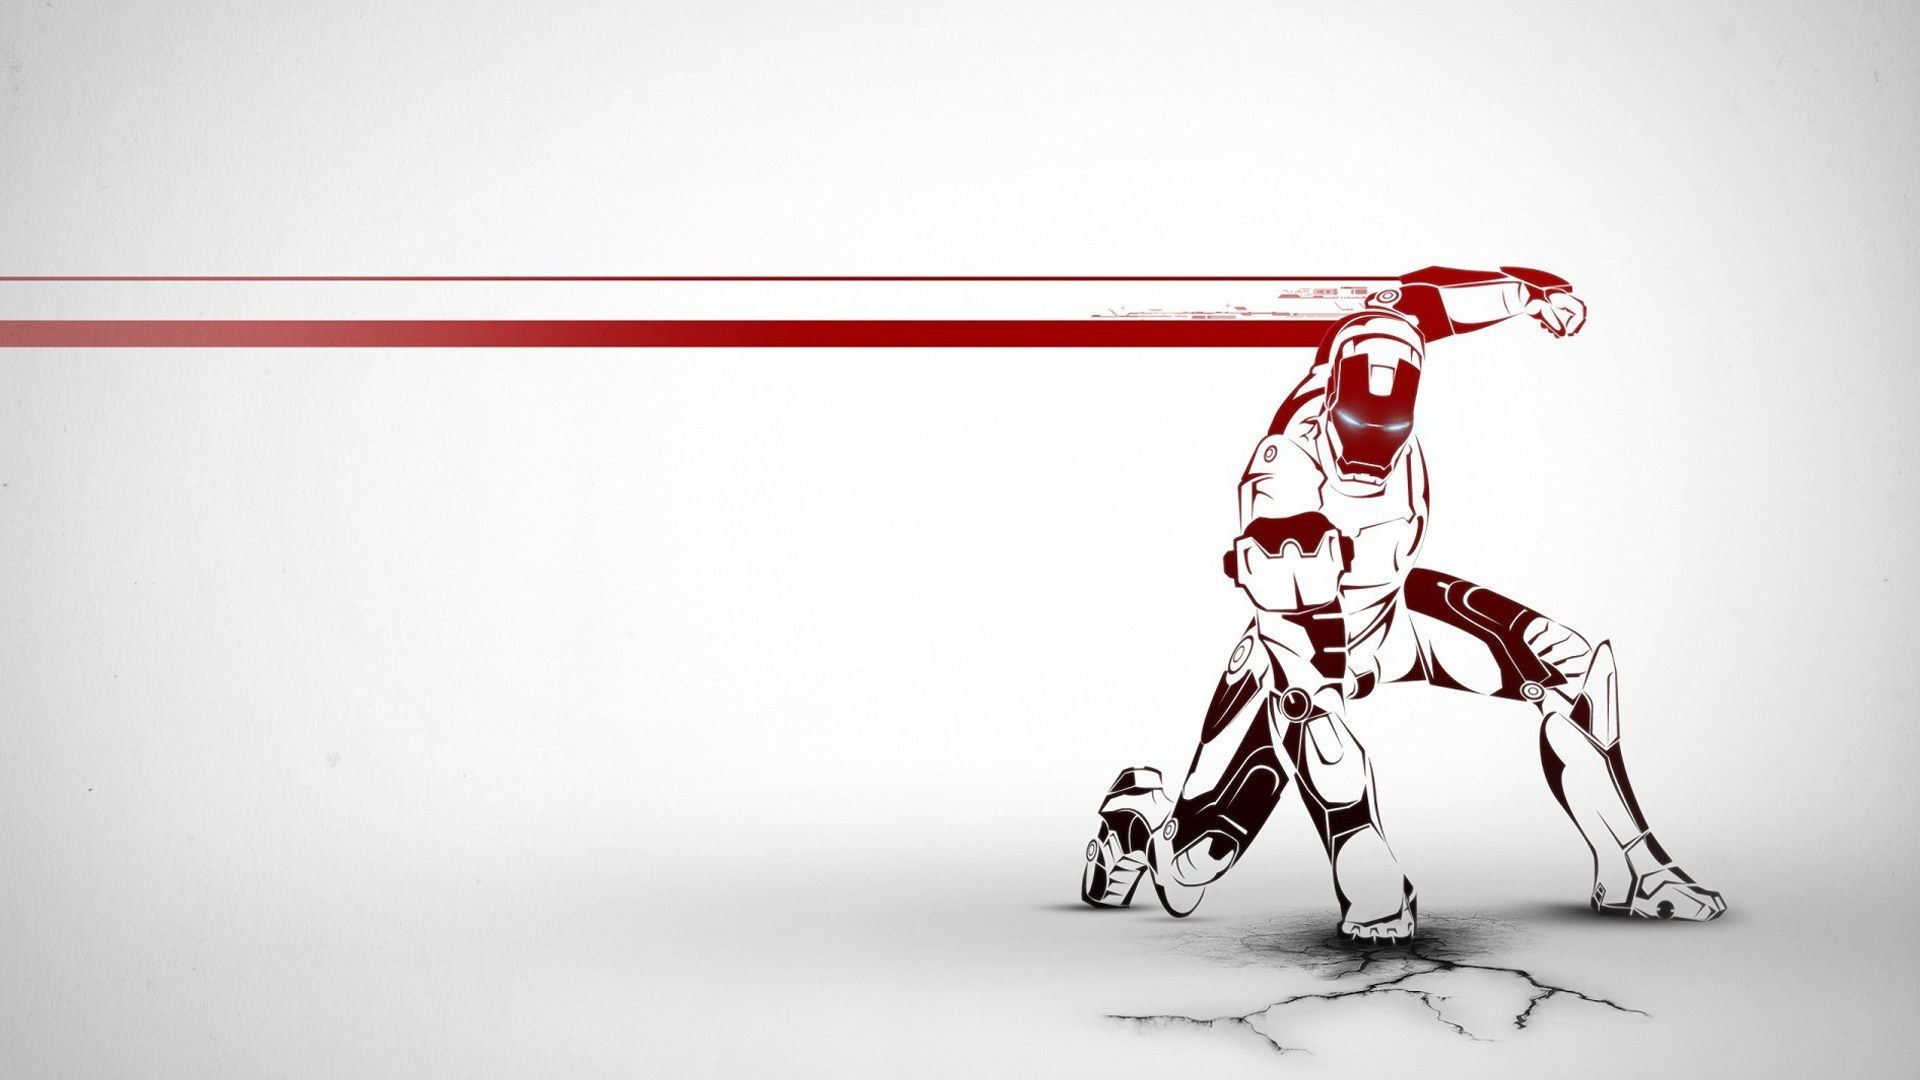 Iron Man Wallpaper Download For PC